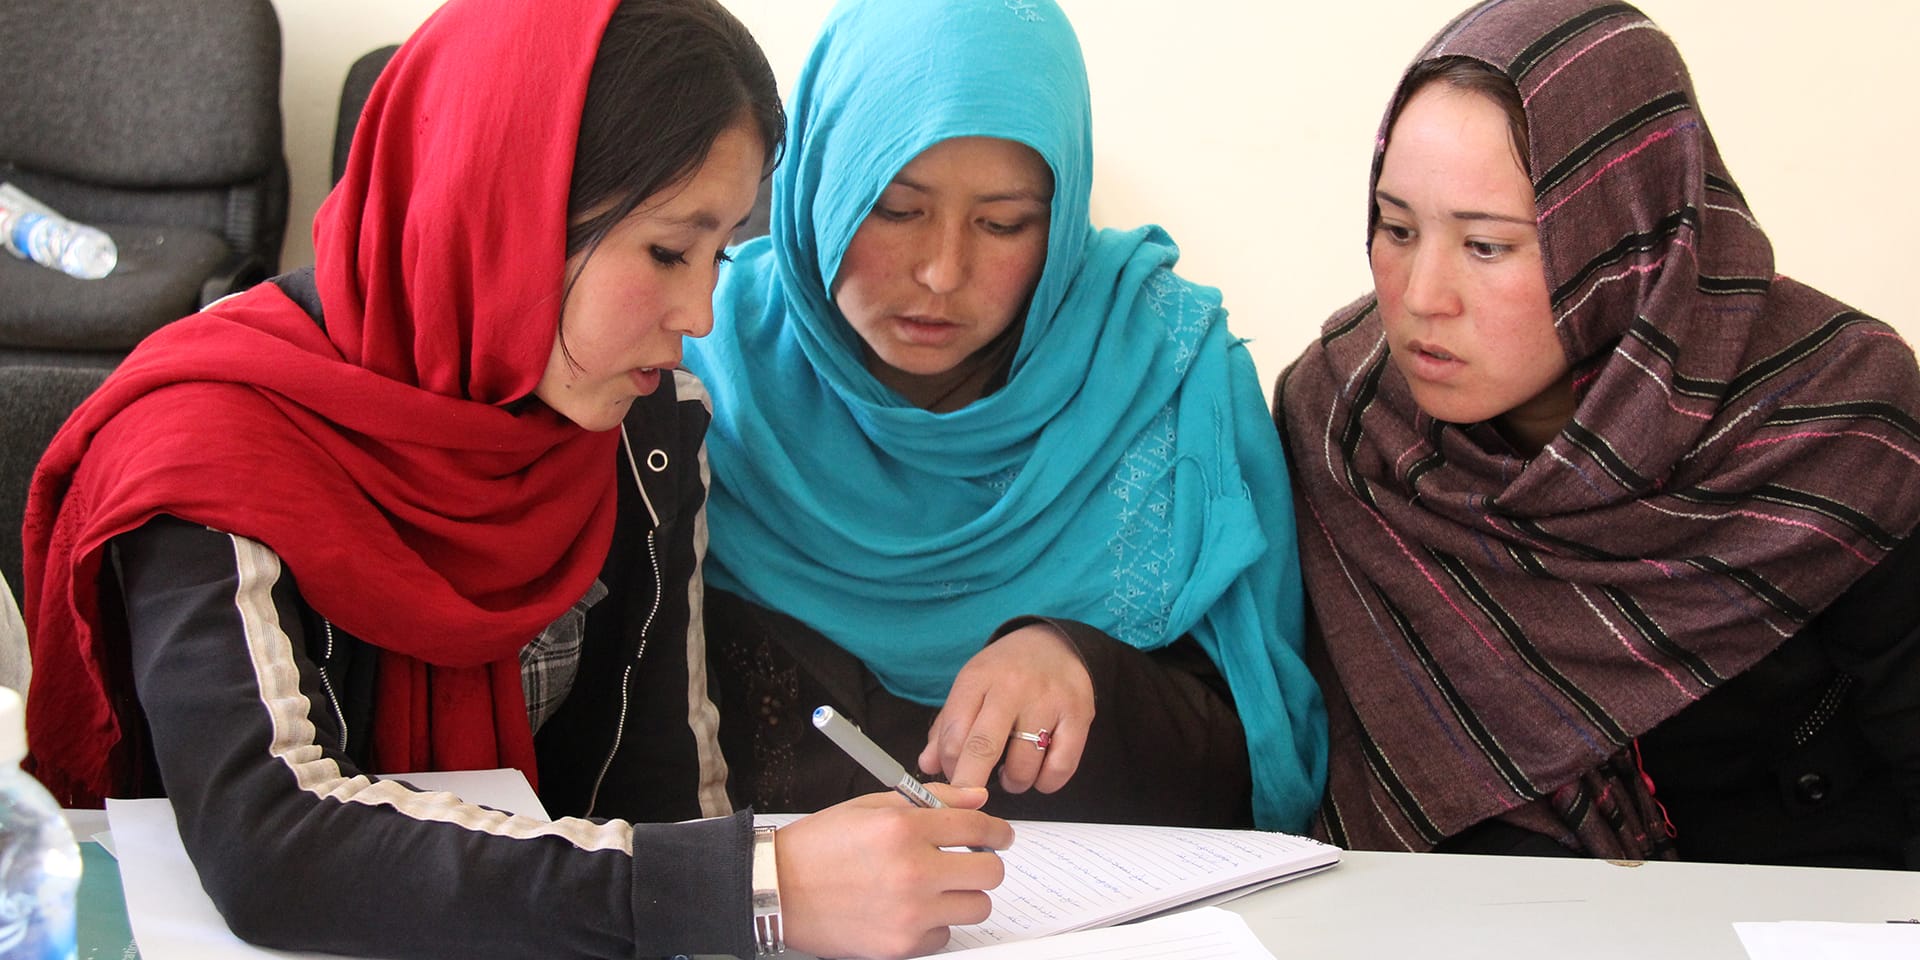 Image of two women reviewing a document while a third woman writes on it with a pen.